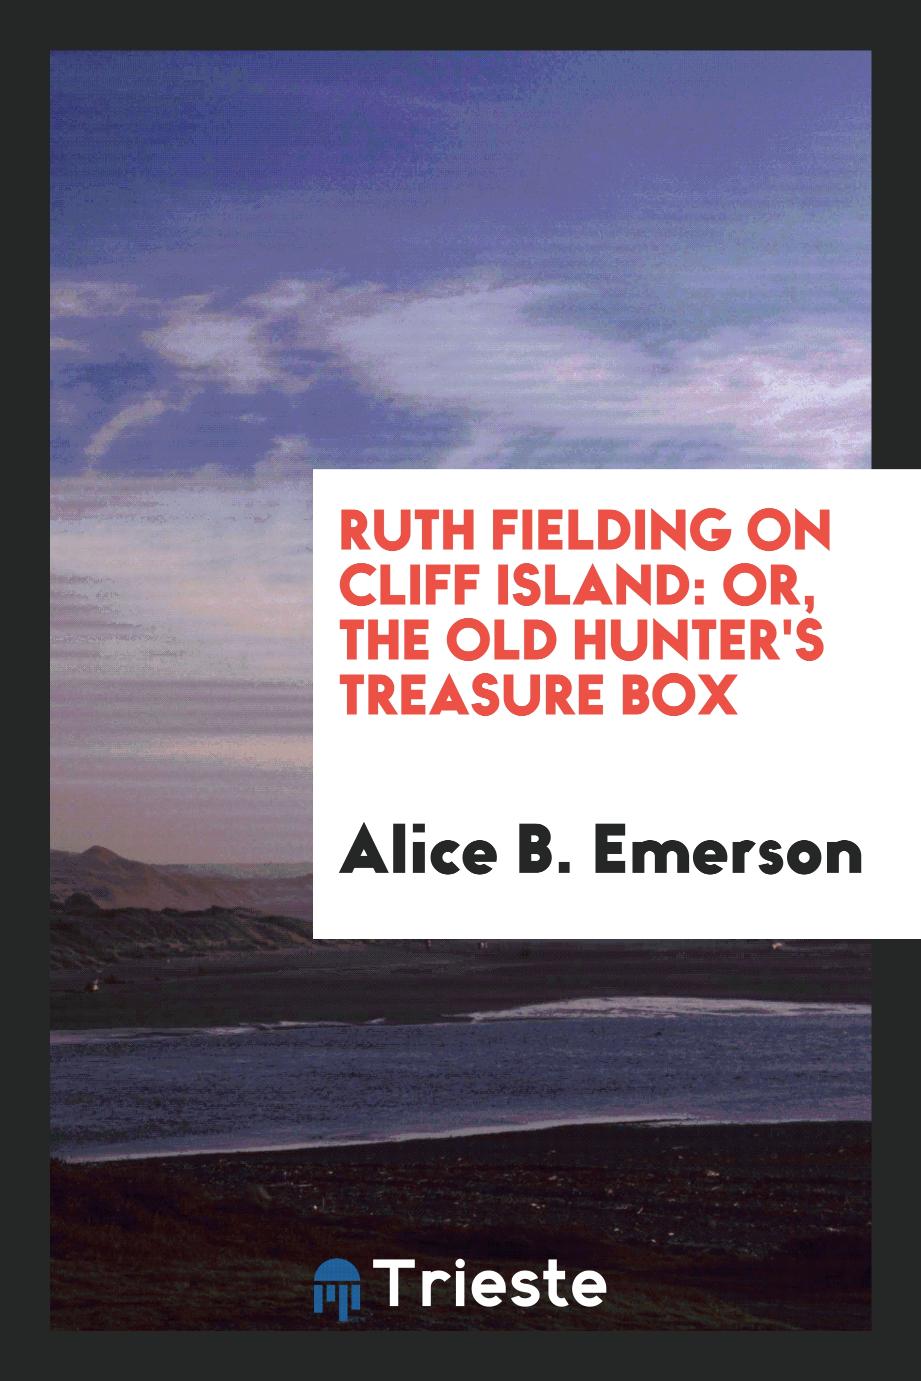 Ruth Fielding on Cliff Island: or, the old hunter's treasure box